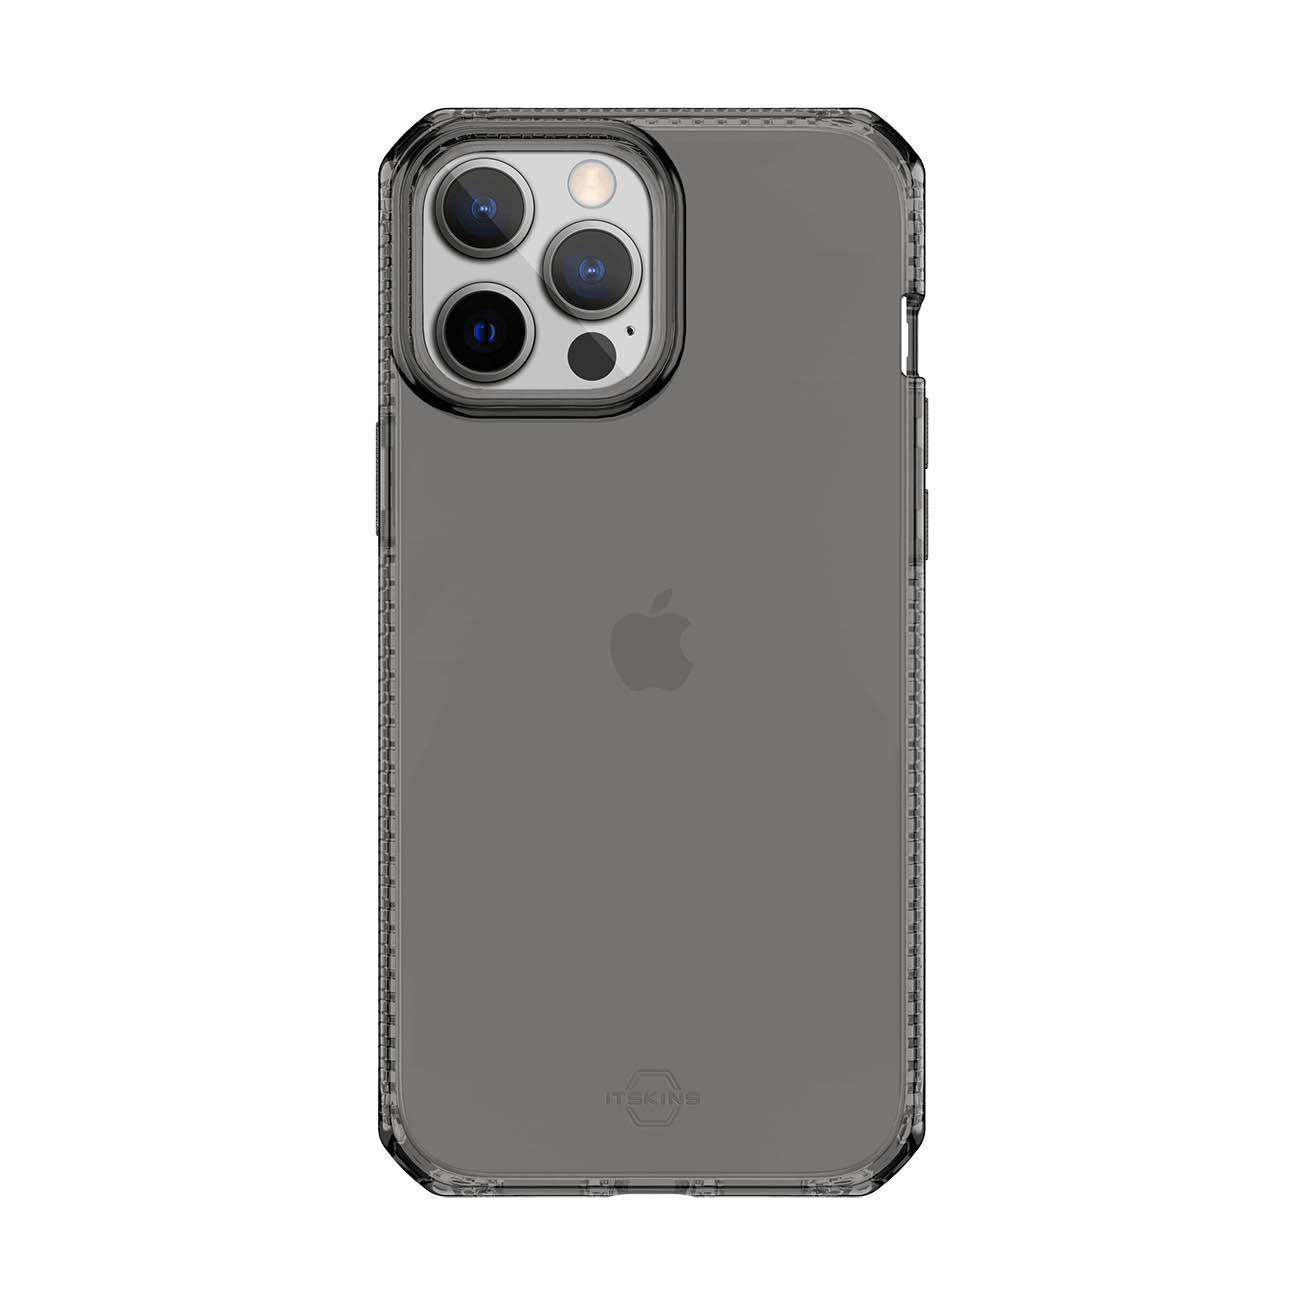 ITSKINS Spectrum Clear Case For iPhone 13 Pro Max / 12 Pro Max - Smoke